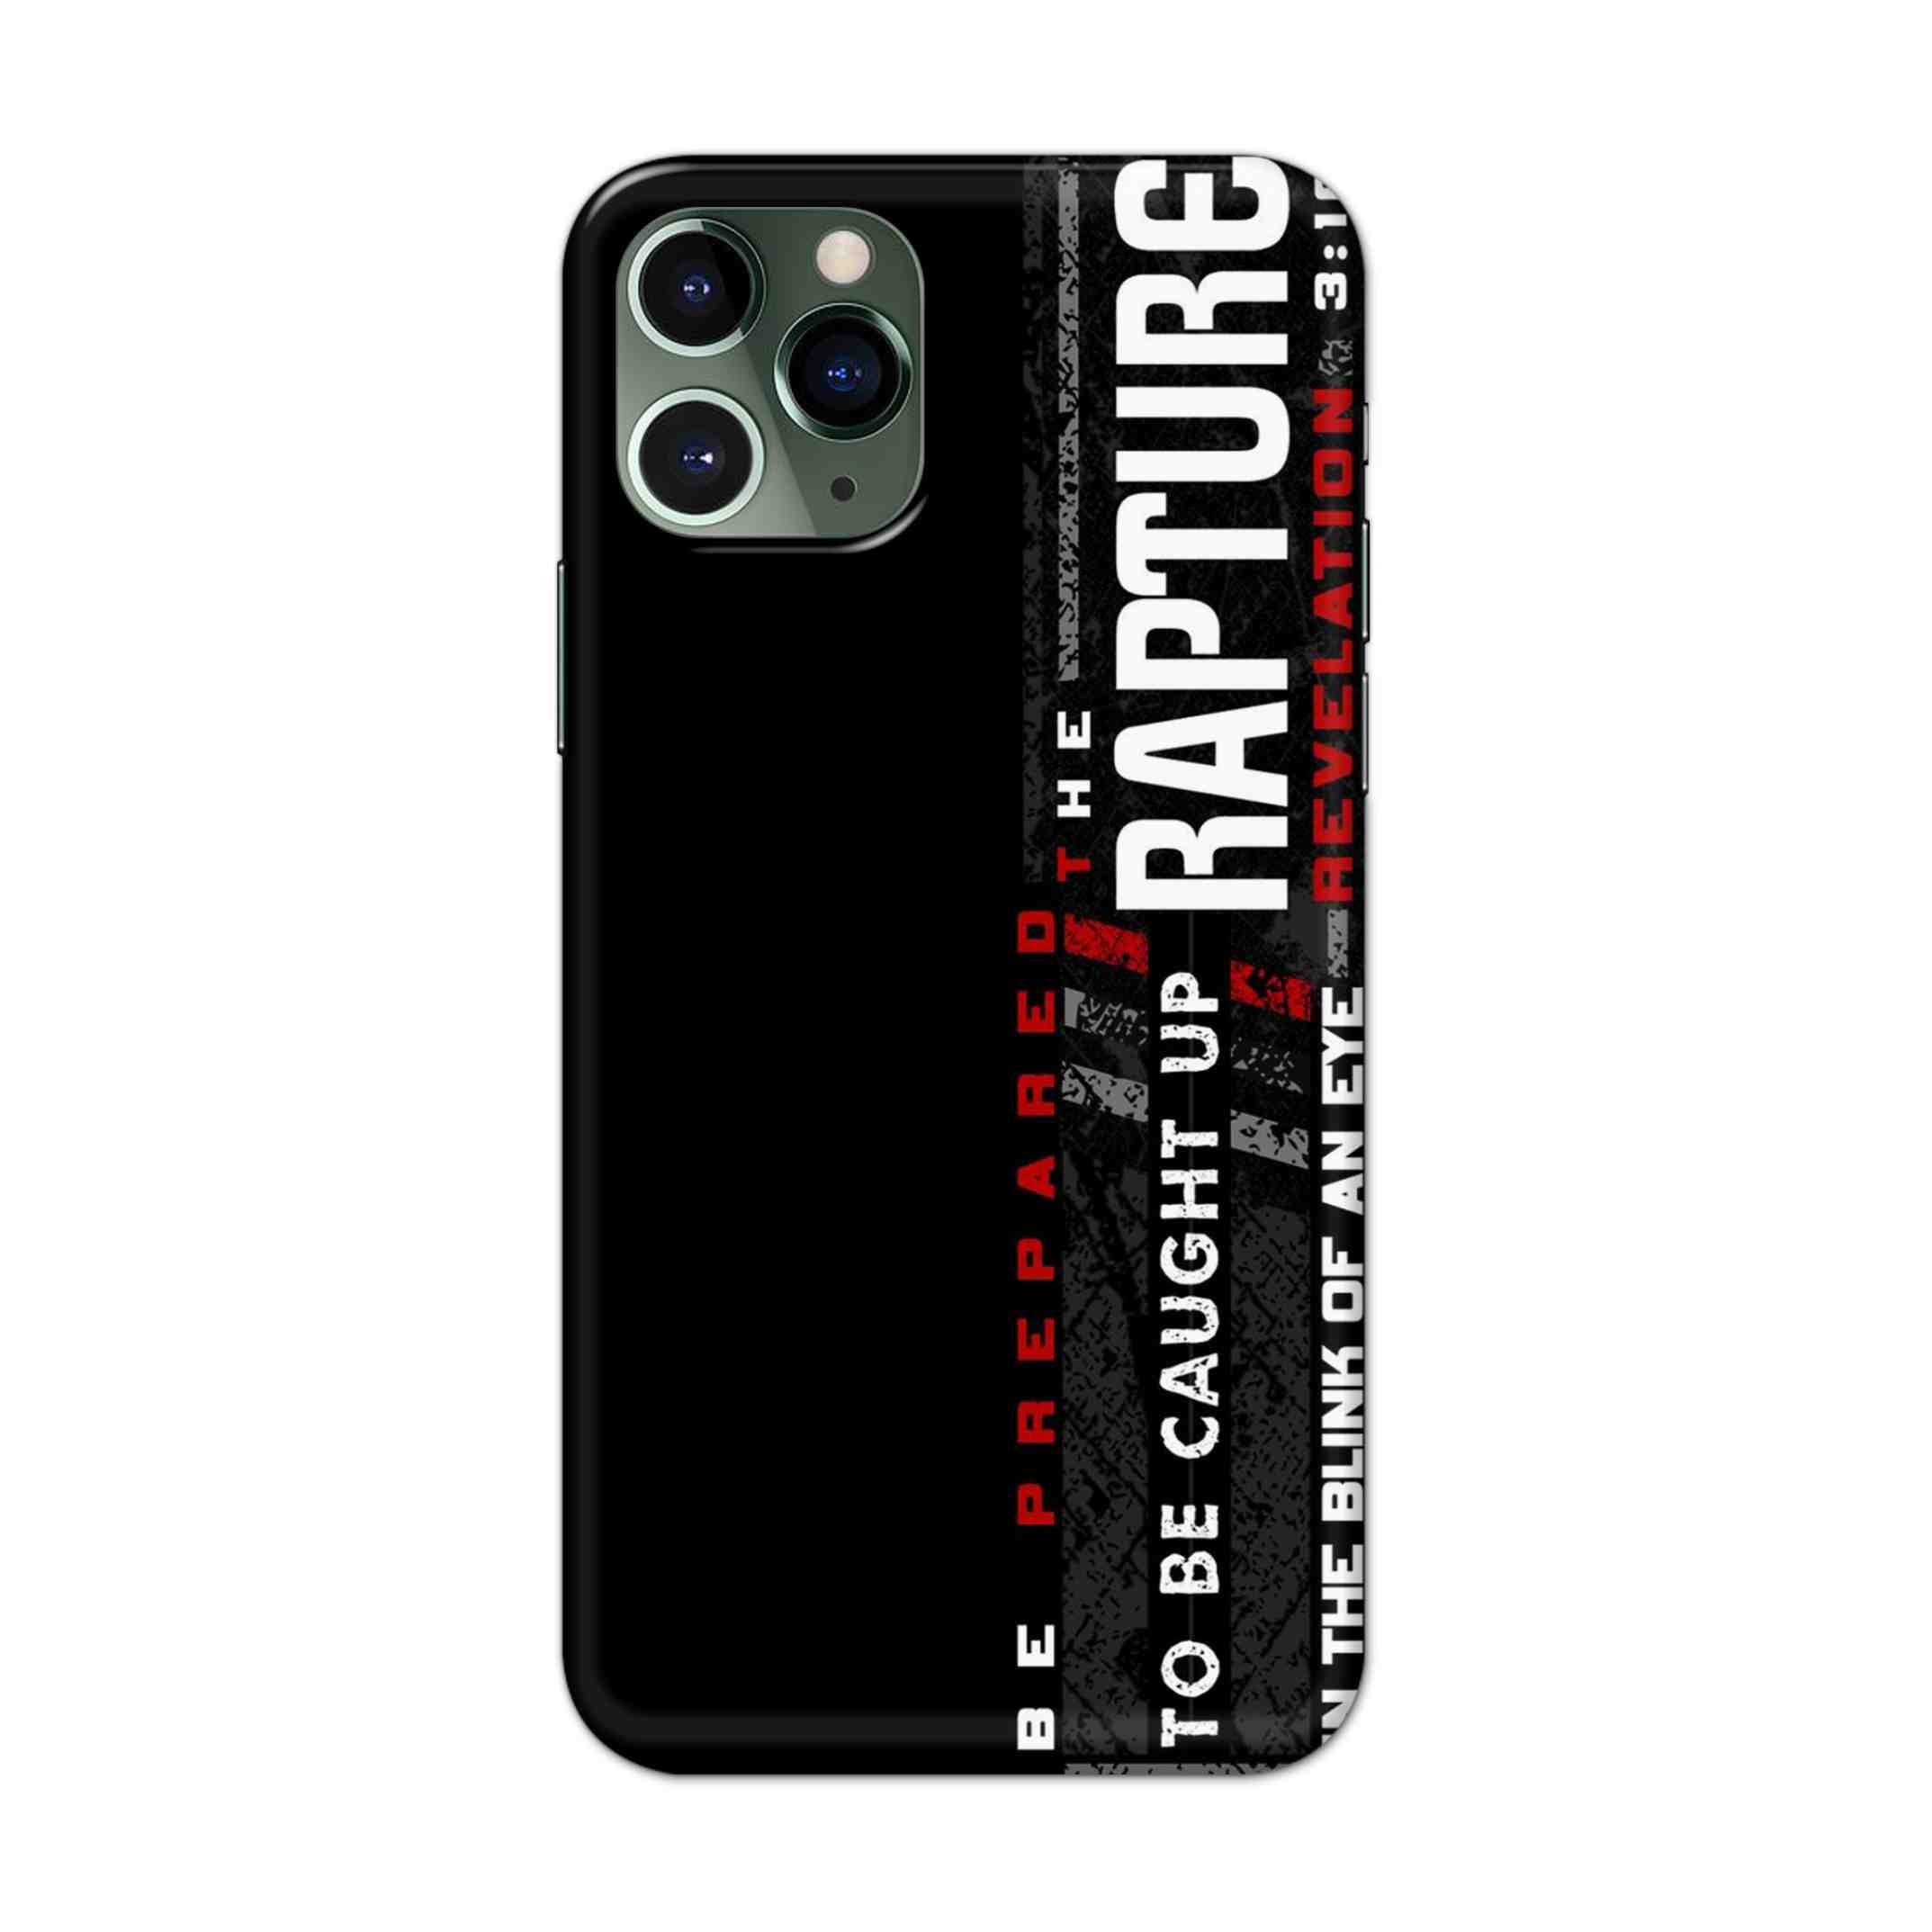 Buy Rapture Hard Back Mobile Phone Case/Cover For iPhone 11 Pro Max Online